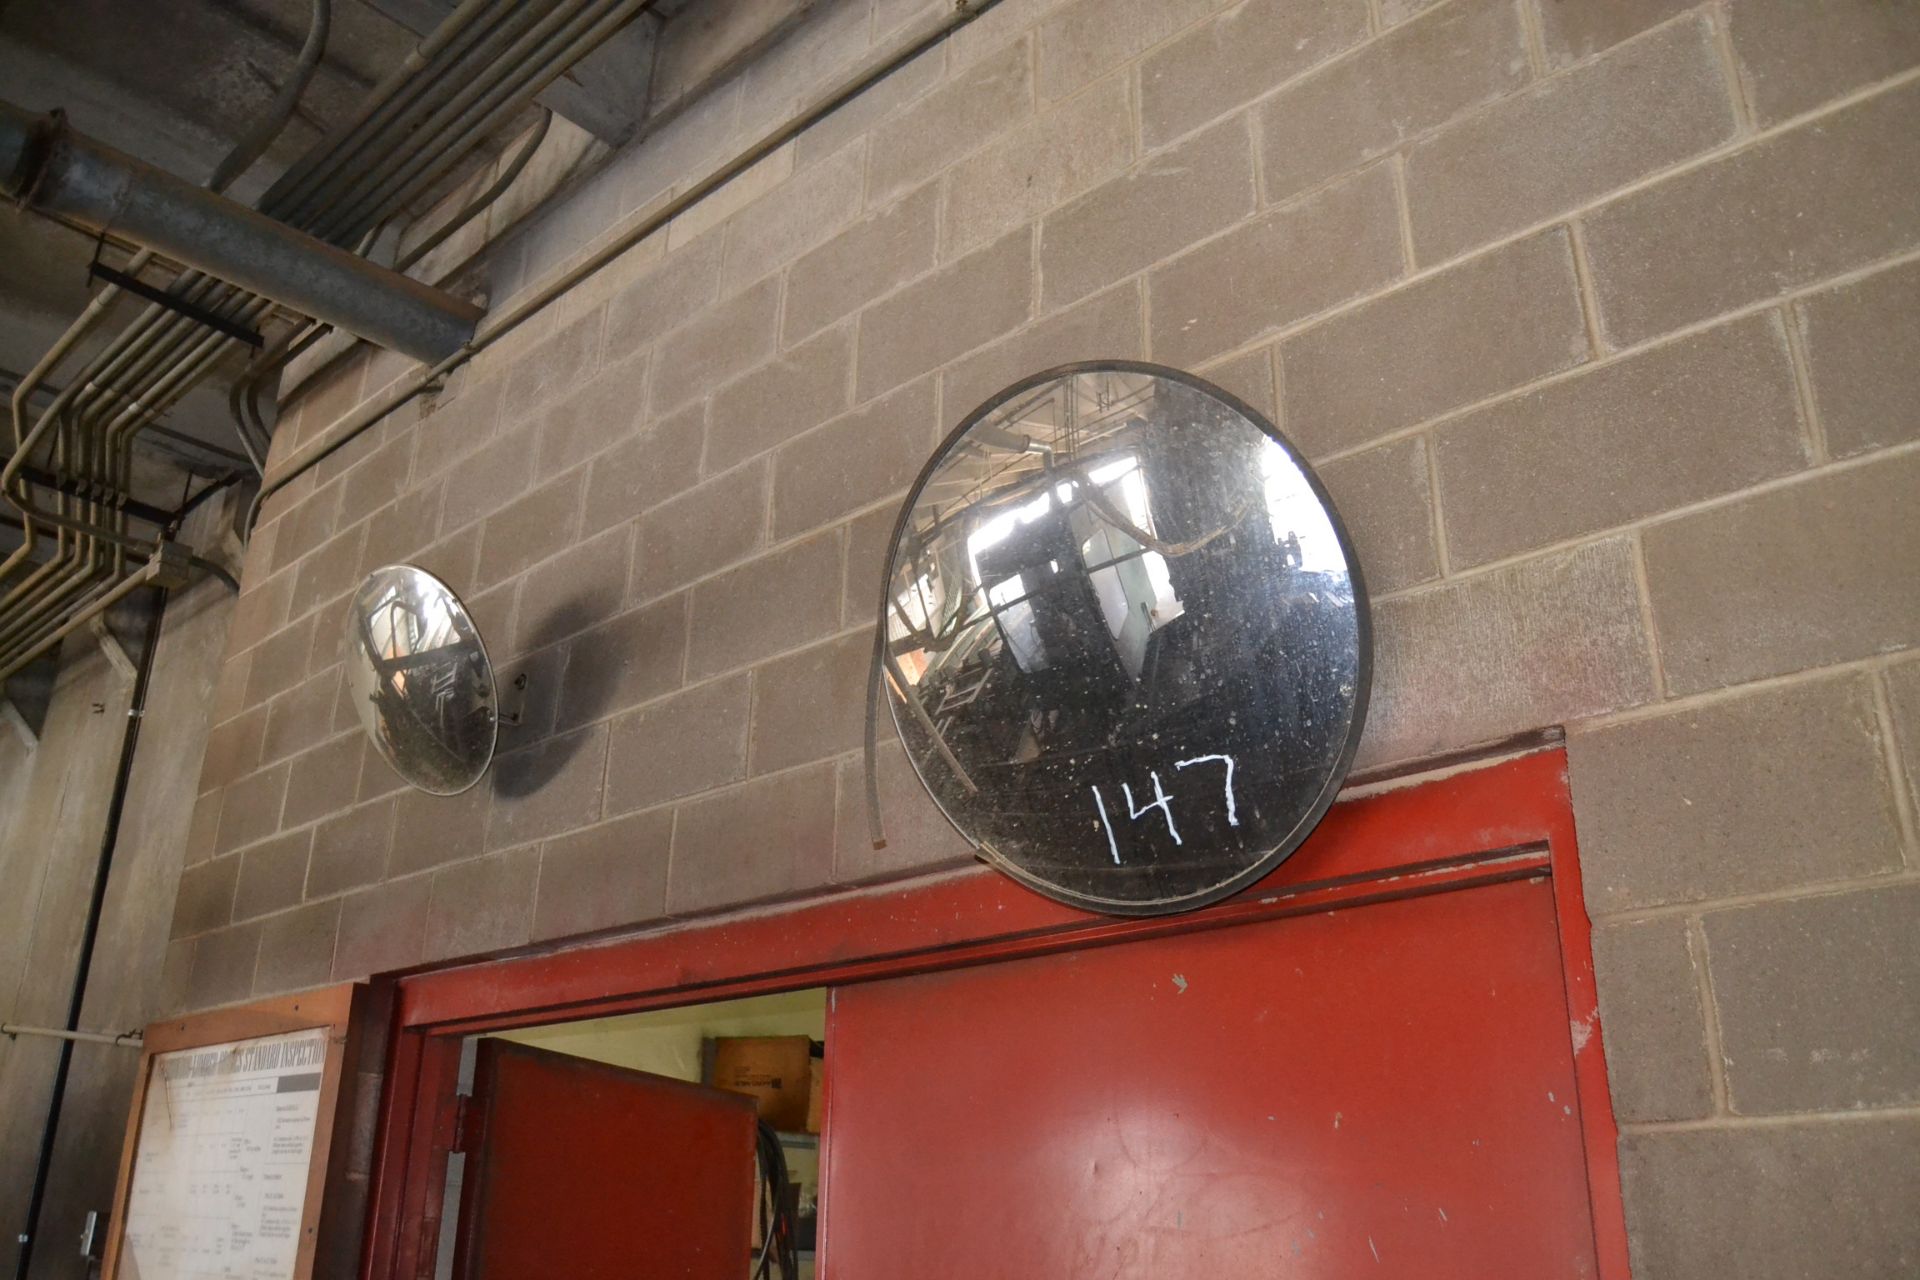 4 CONCAVE MIRRORS IN SAWMILL BUILDING